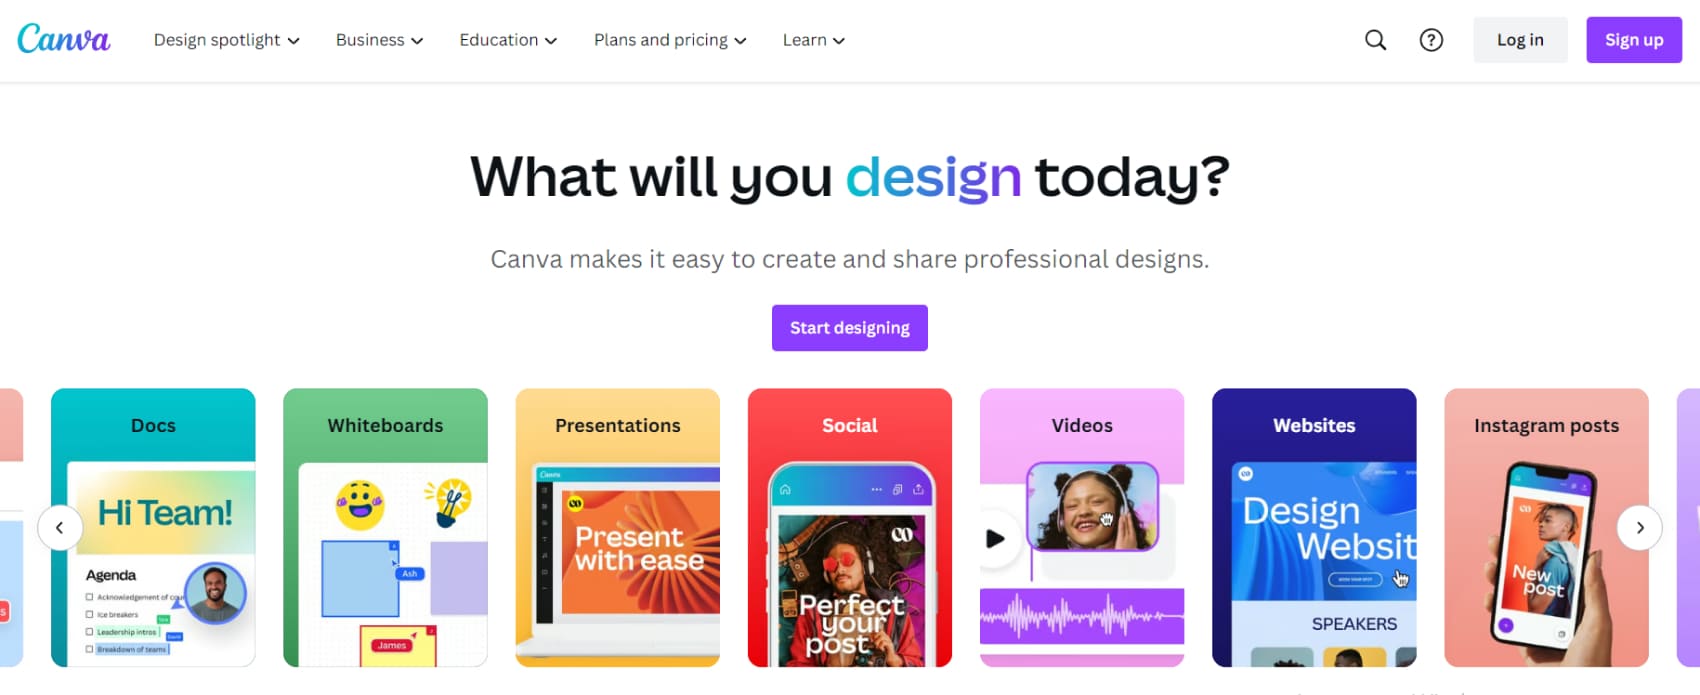 Canva is a tool for inbound marketing